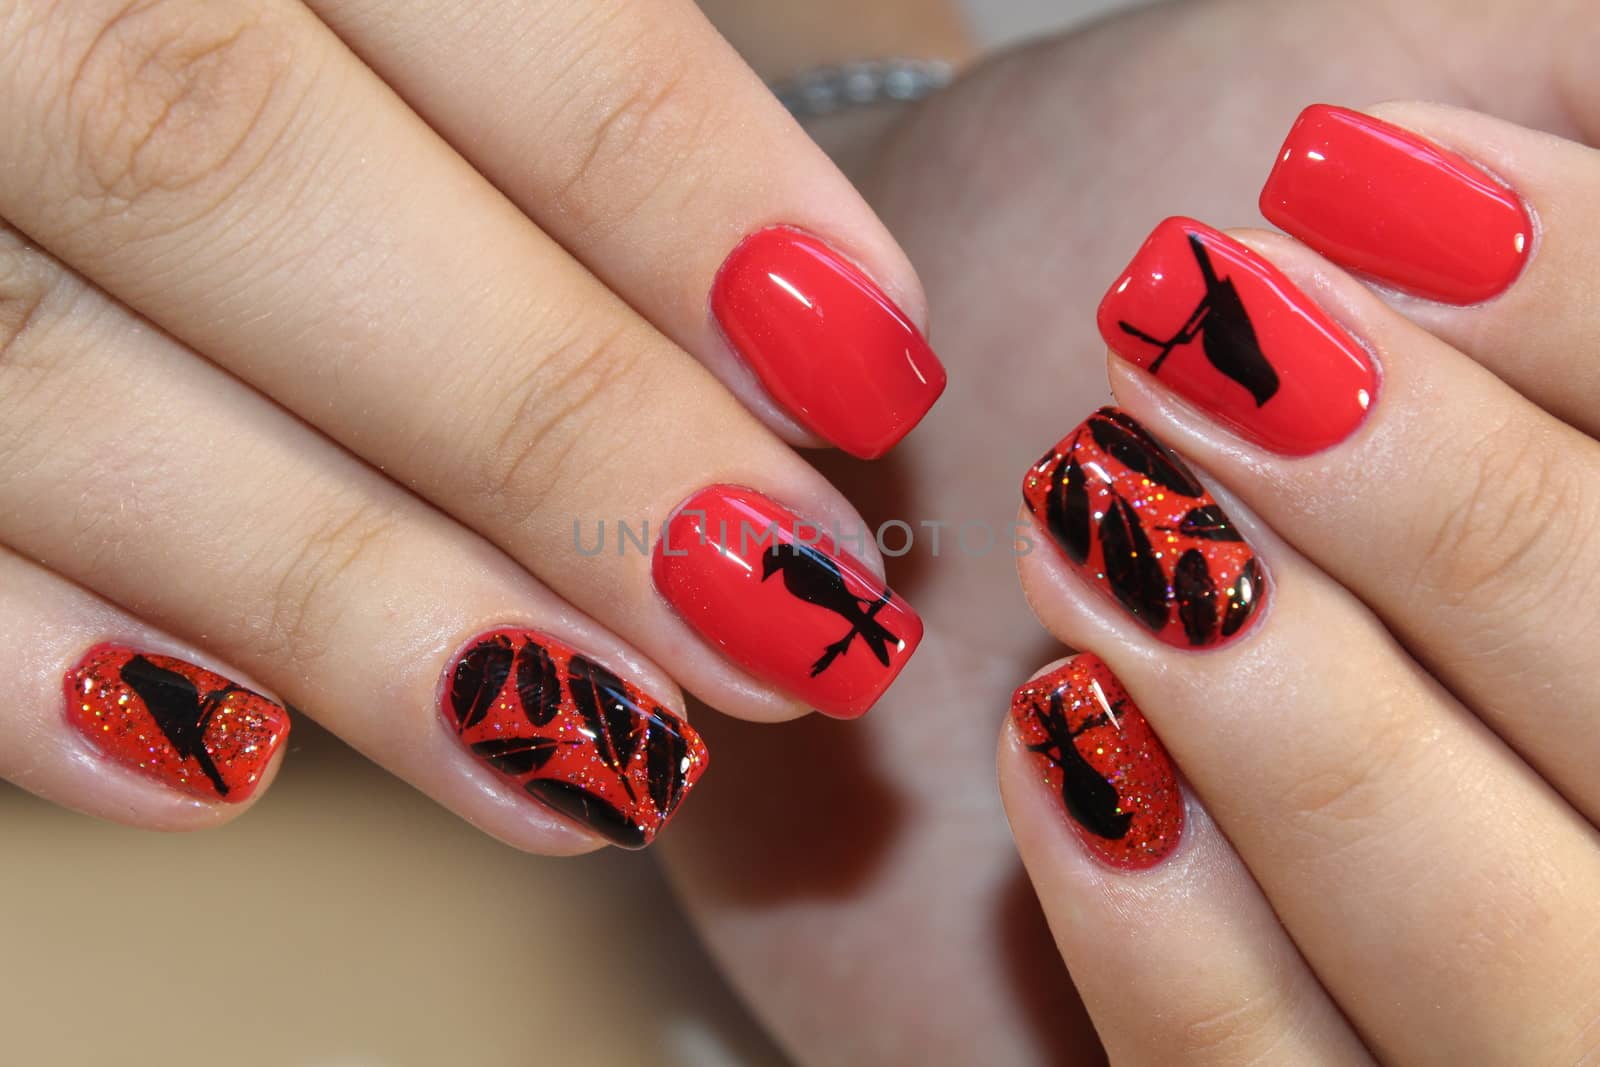 Manicure design red nails with a pattern